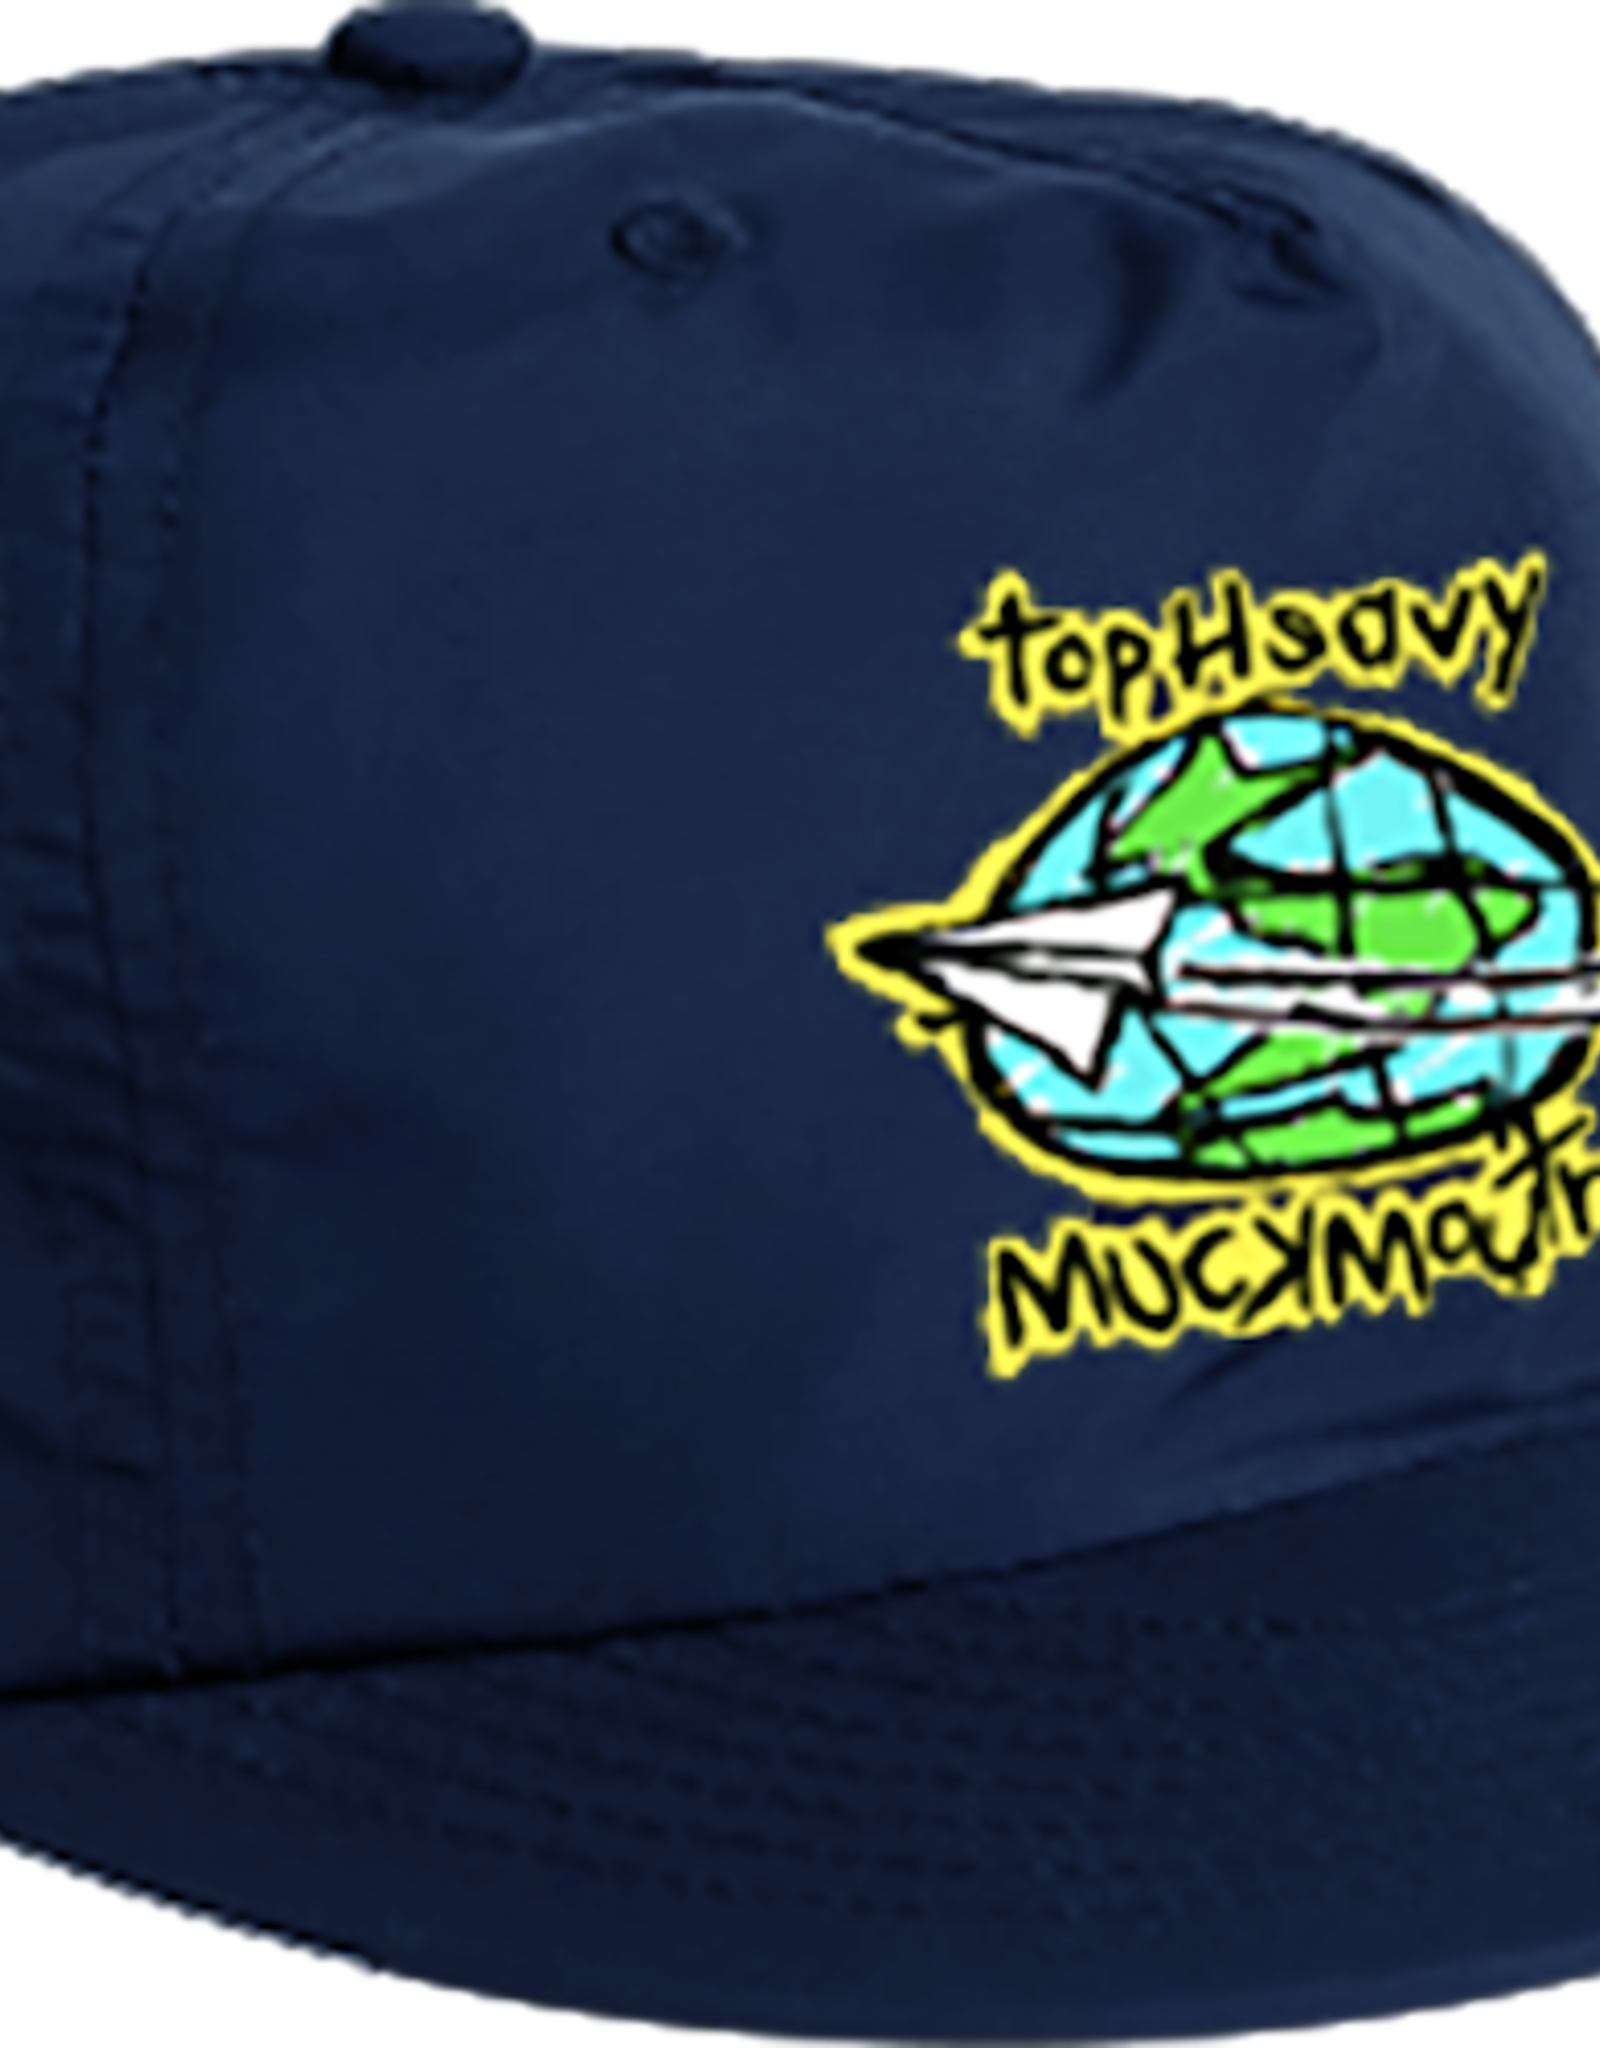 TOP HEAVY ENTERTAINMENT TOP HEAVY MUCKMOUTH COLLAB HAT - NAVY